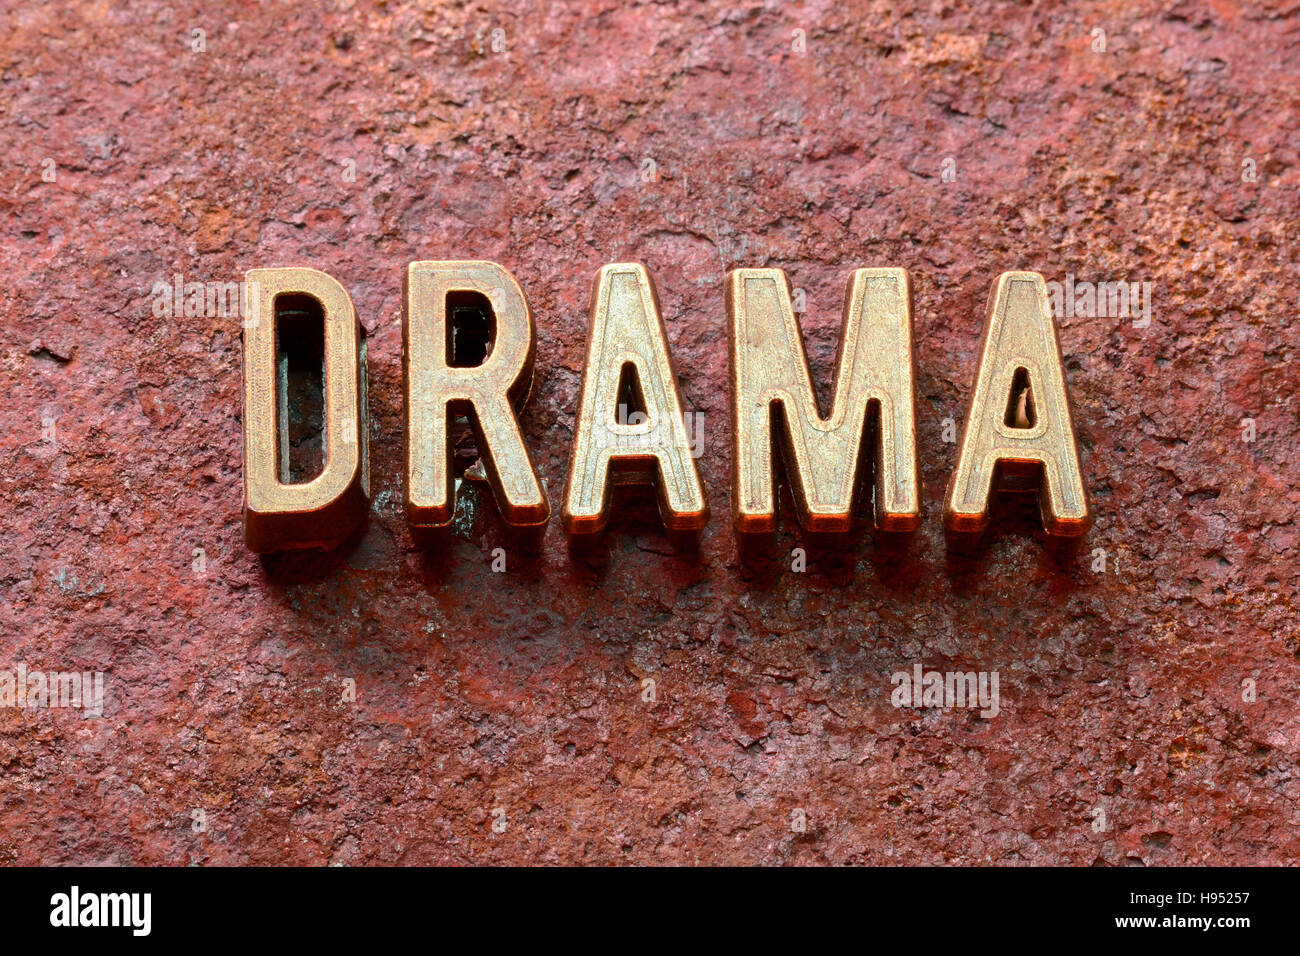 drama word made from metallic letters on red rusty surface Stock Photo